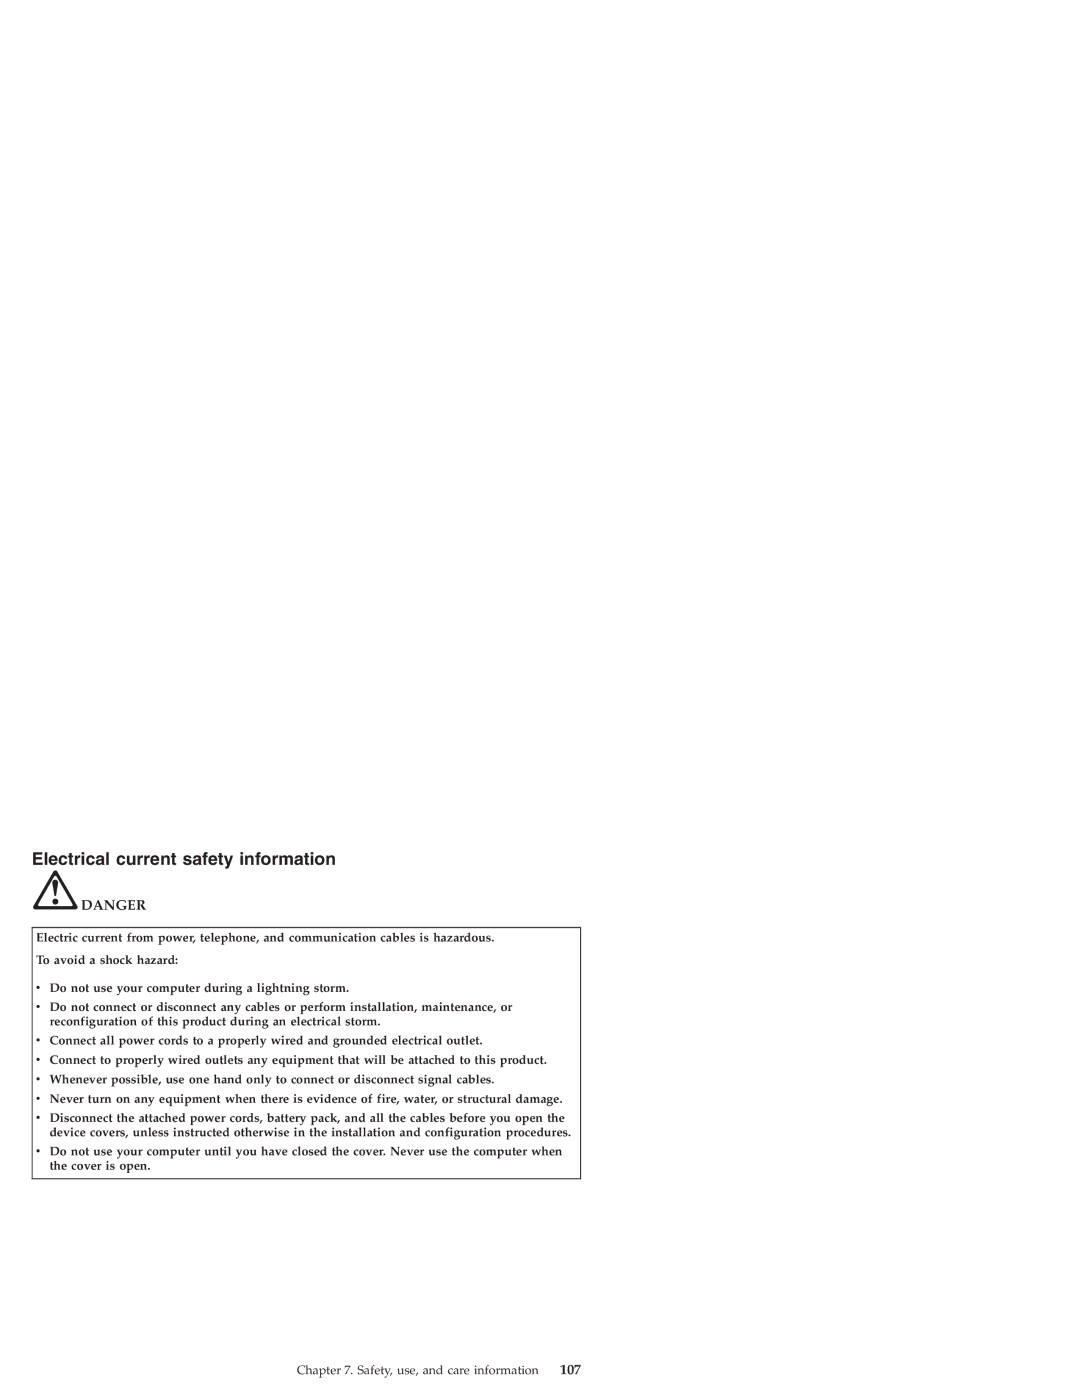 Lenovo S10 manual Electrical current safety information, 107 